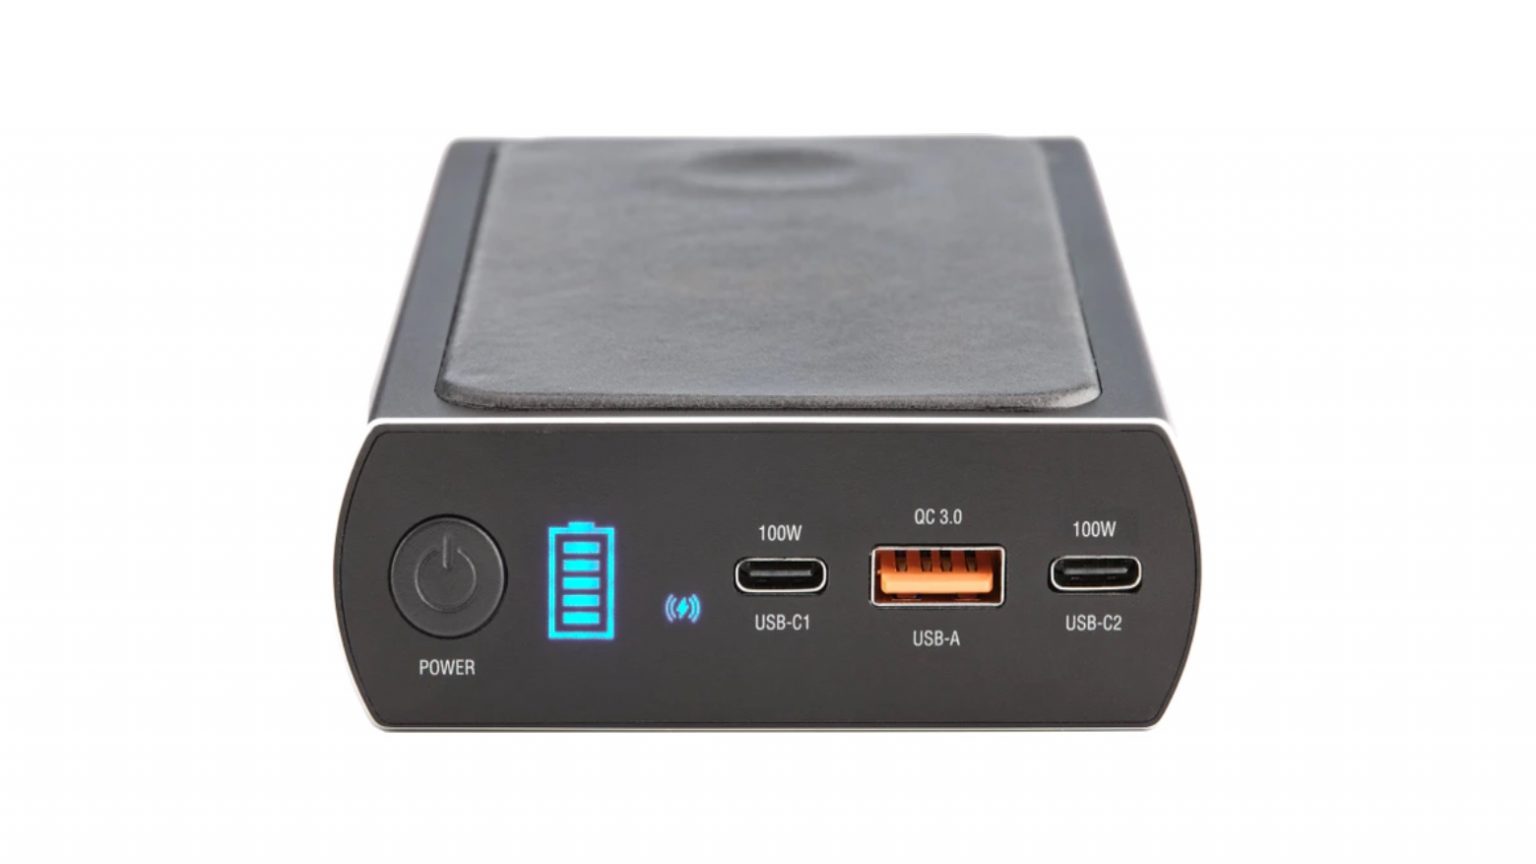 Intelli ScoutPro can charge up to five devices at once.